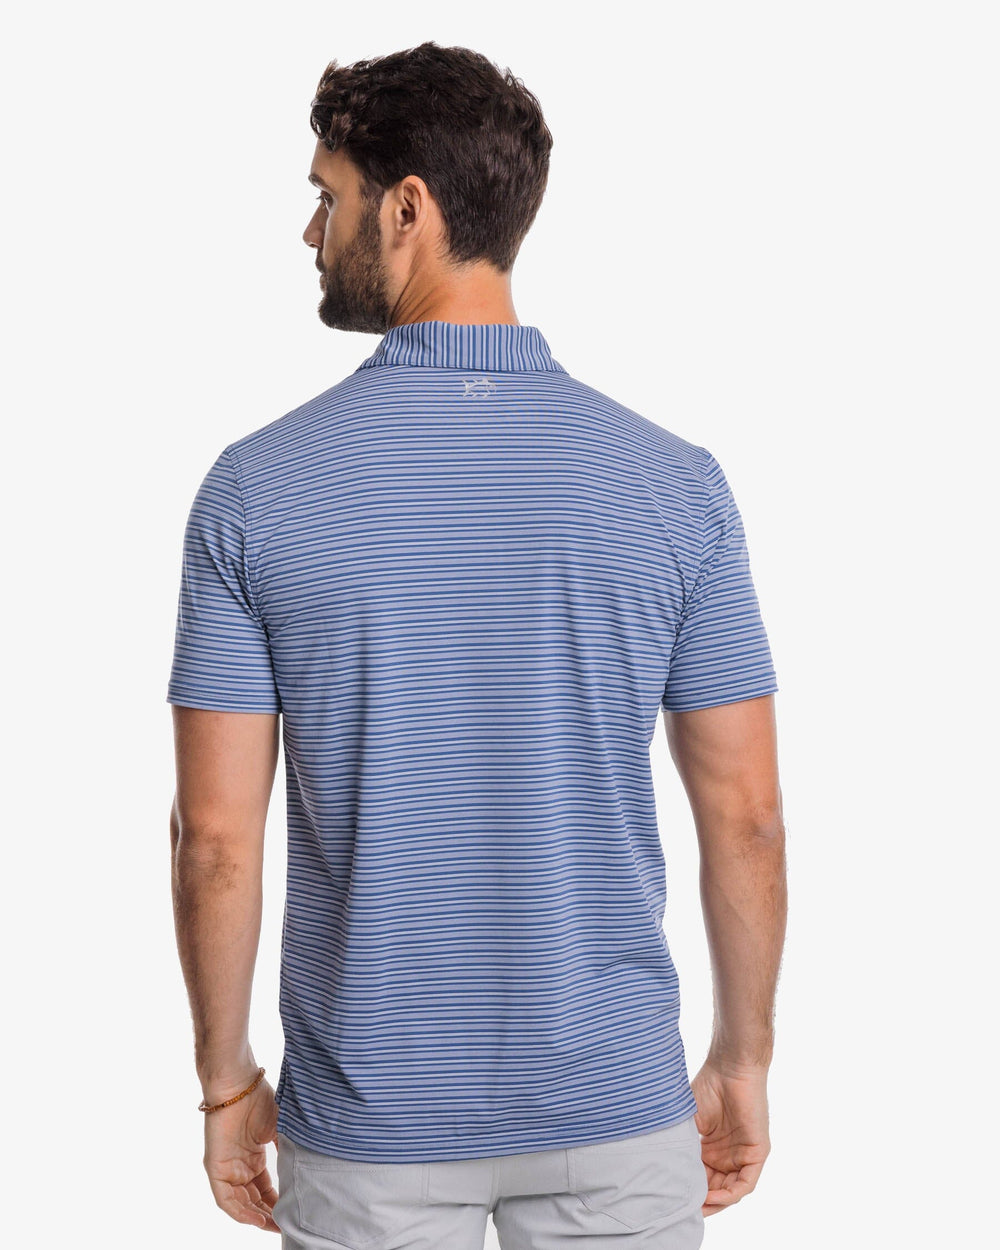 The back view of the Southern Tide brrr°®-eeze Bowen Stripe Performance Polo Shirt by Southern Tide - Aged Denim